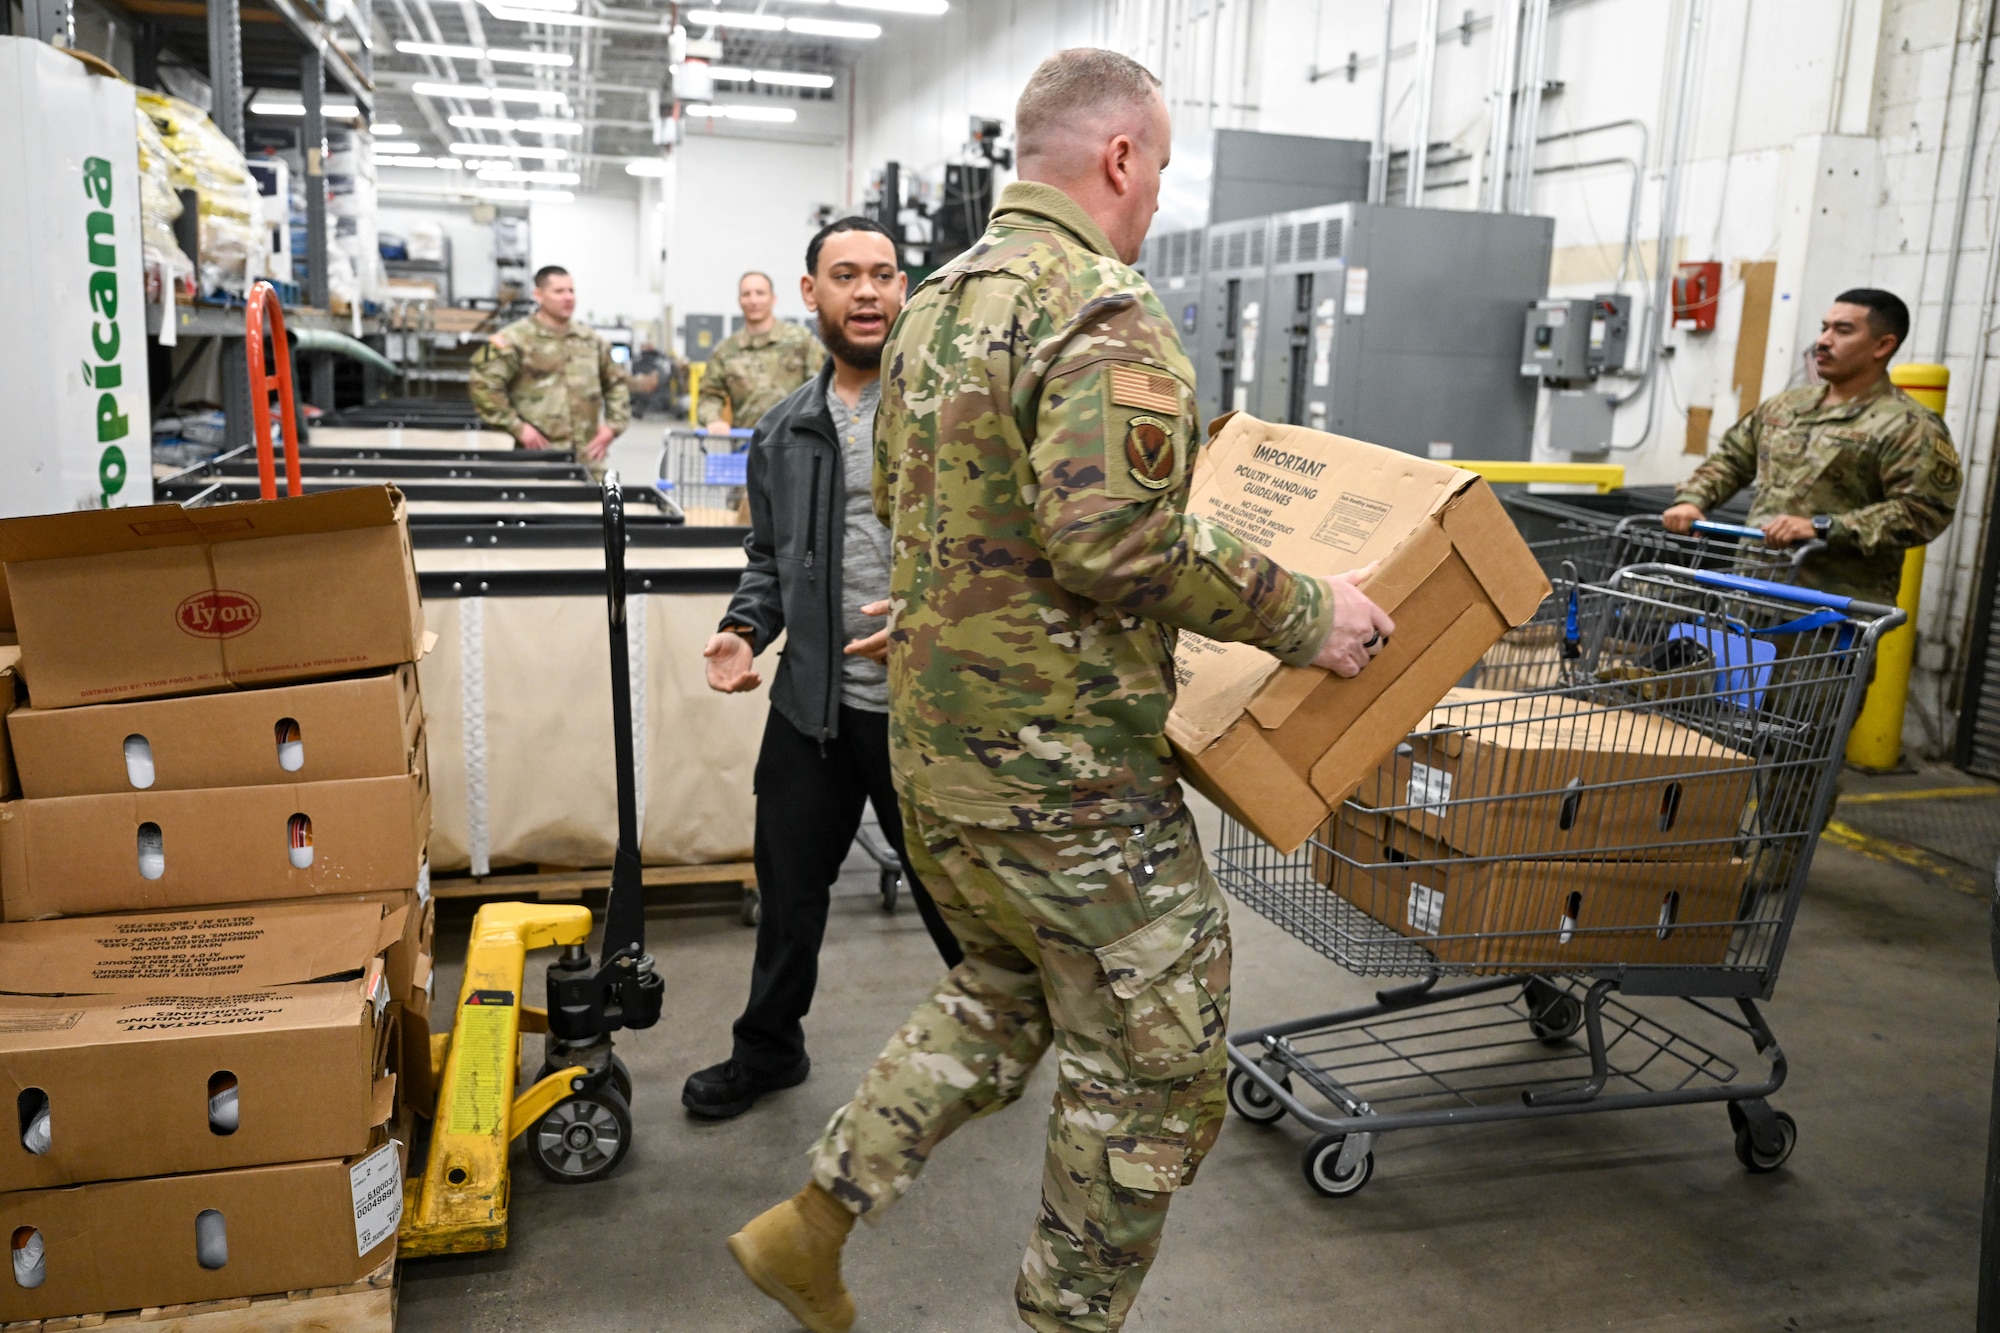 A first sergeant loads a box of turkeys into a grocery cart.